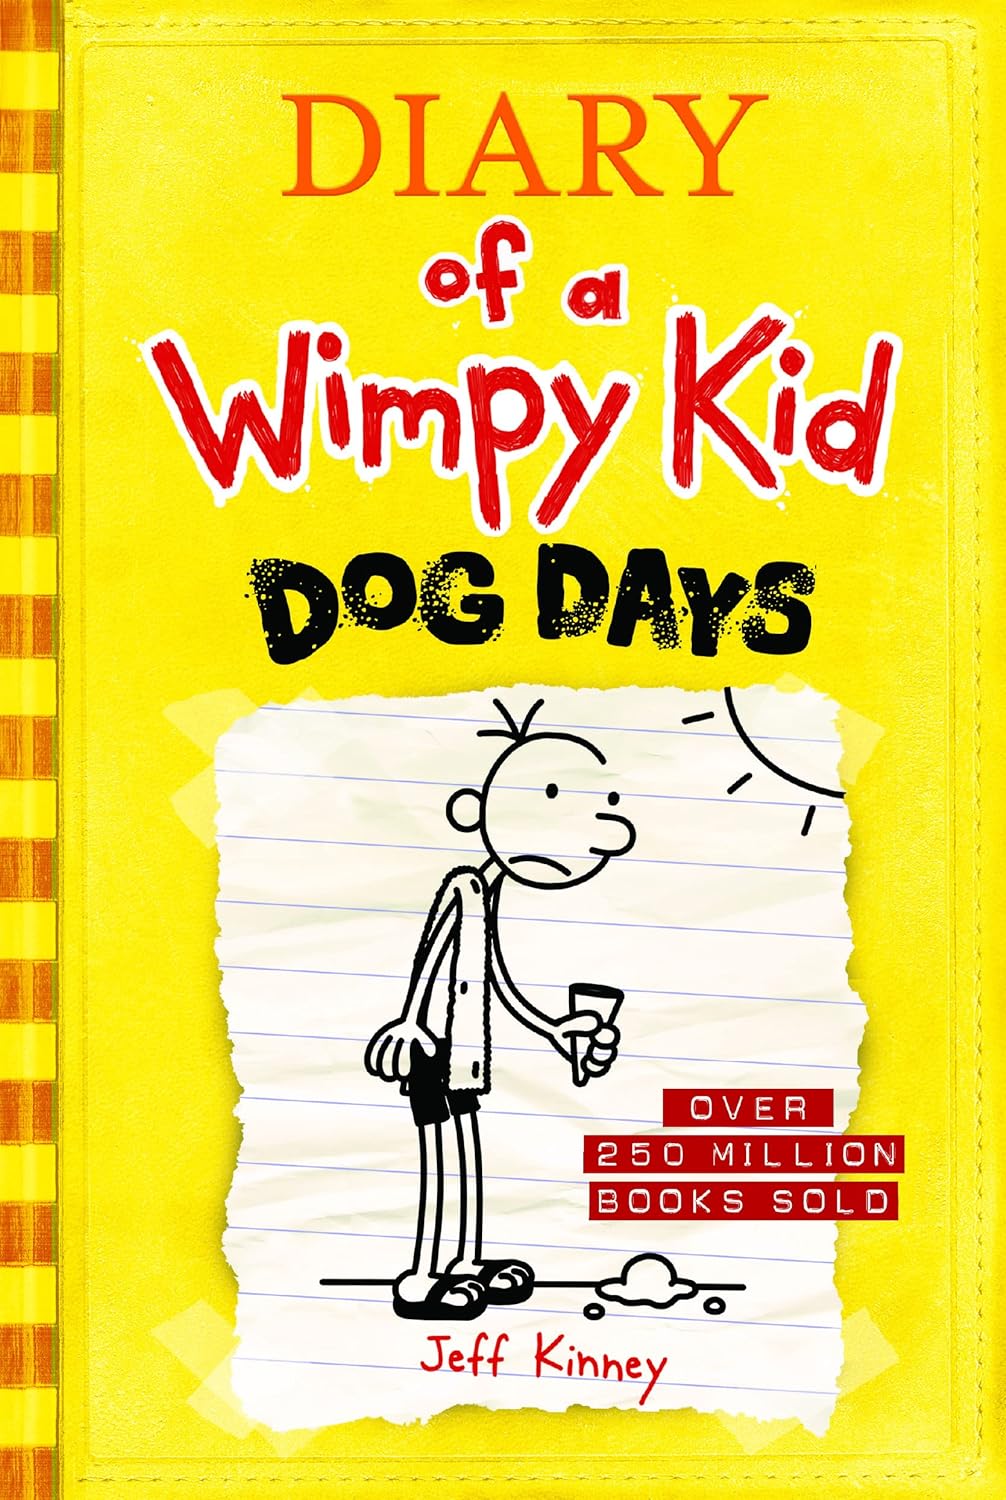 Dog Days (Diary of a Wimpy Kid #4) - by Jeff Kinney (Hardcover)